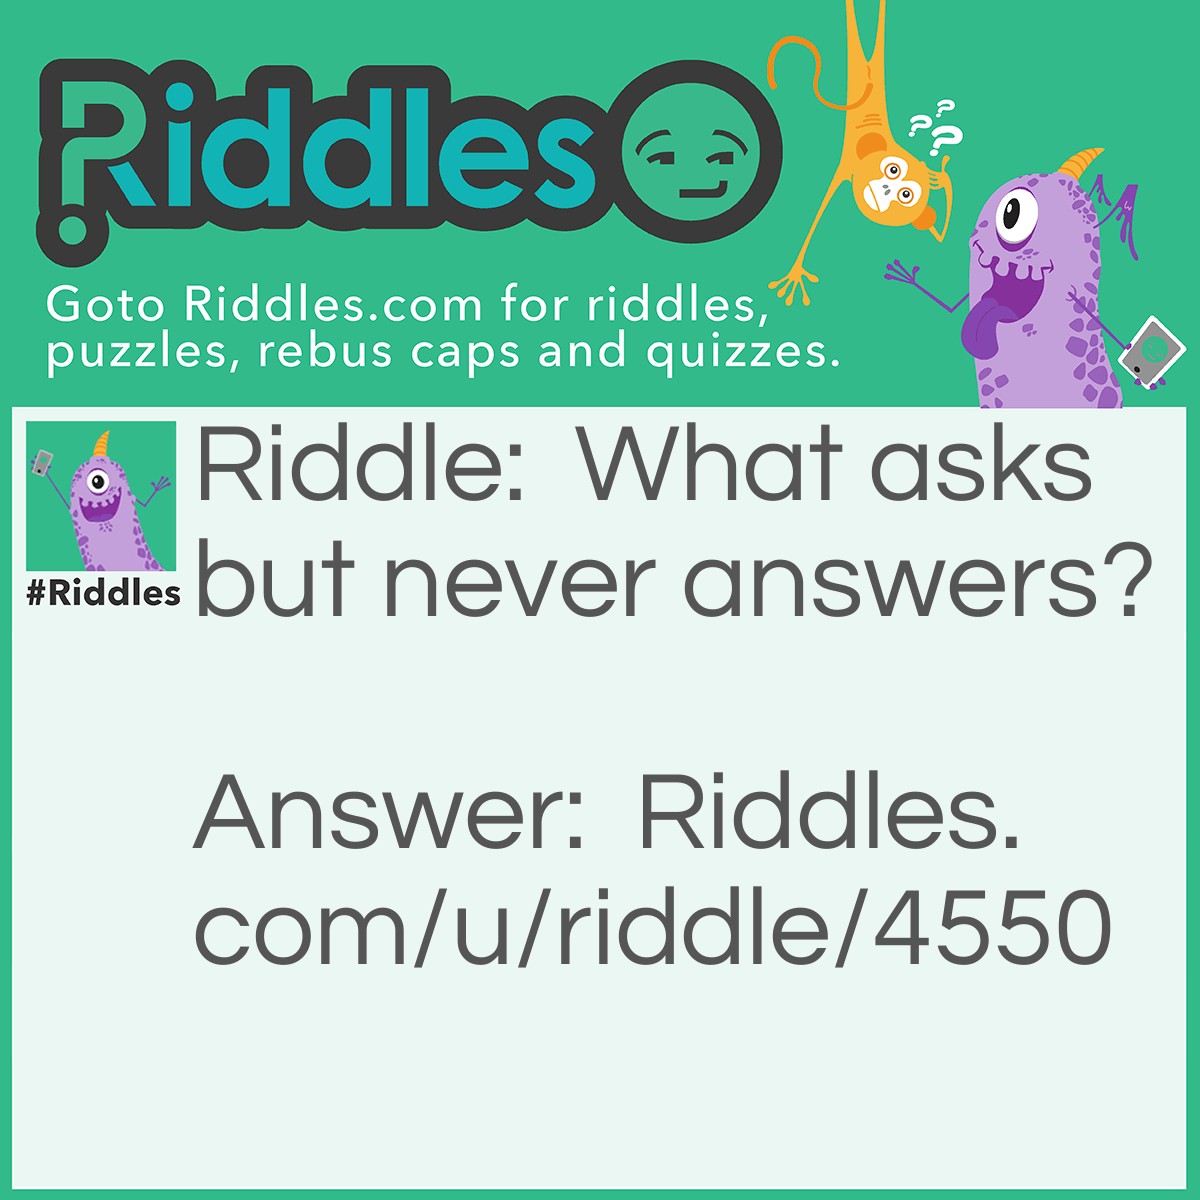 Riddle: What asks but never answers? Answer: An Owl.